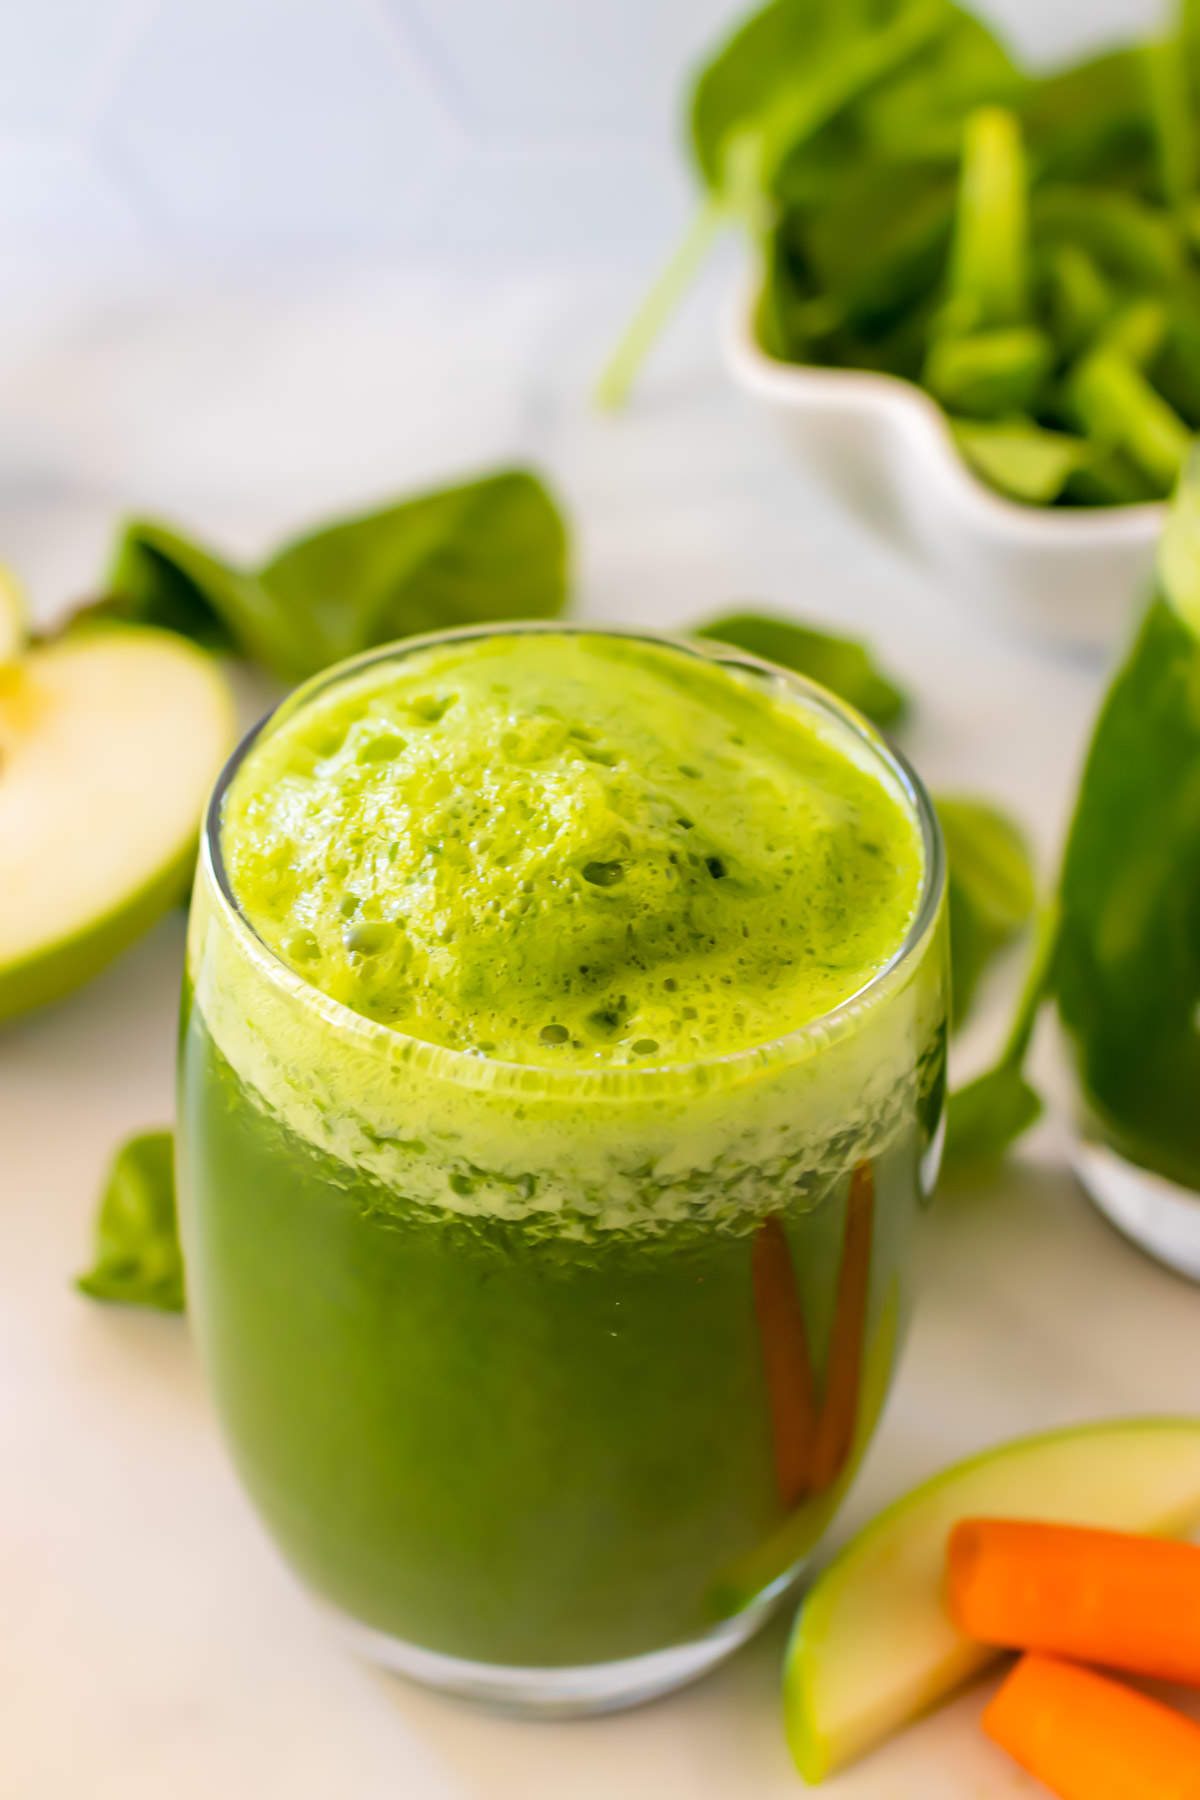 A glass of green juice.